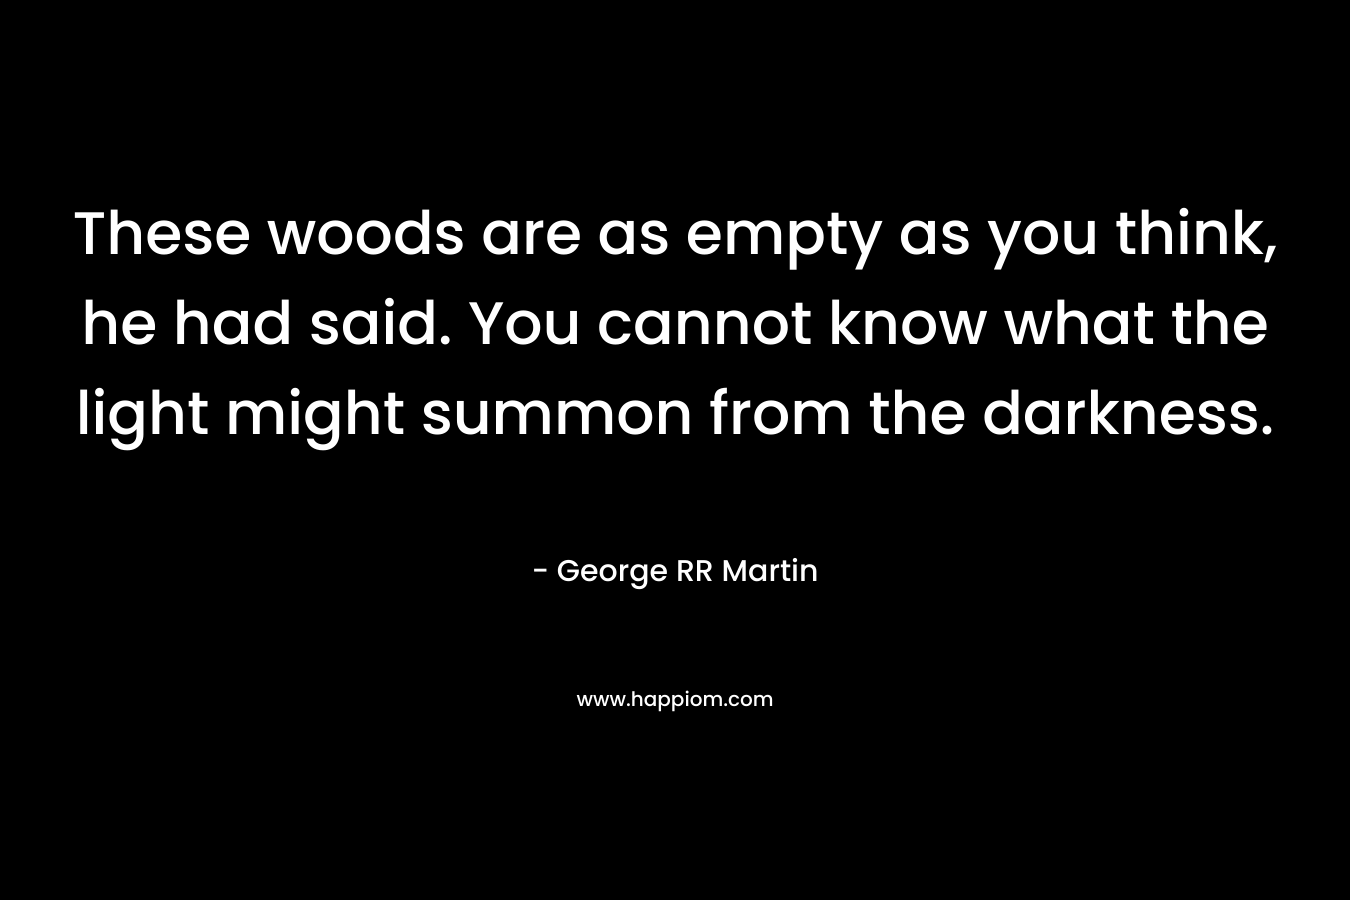 These woods are as empty as you think, he had said. You cannot know what the light might summon from the darkness.